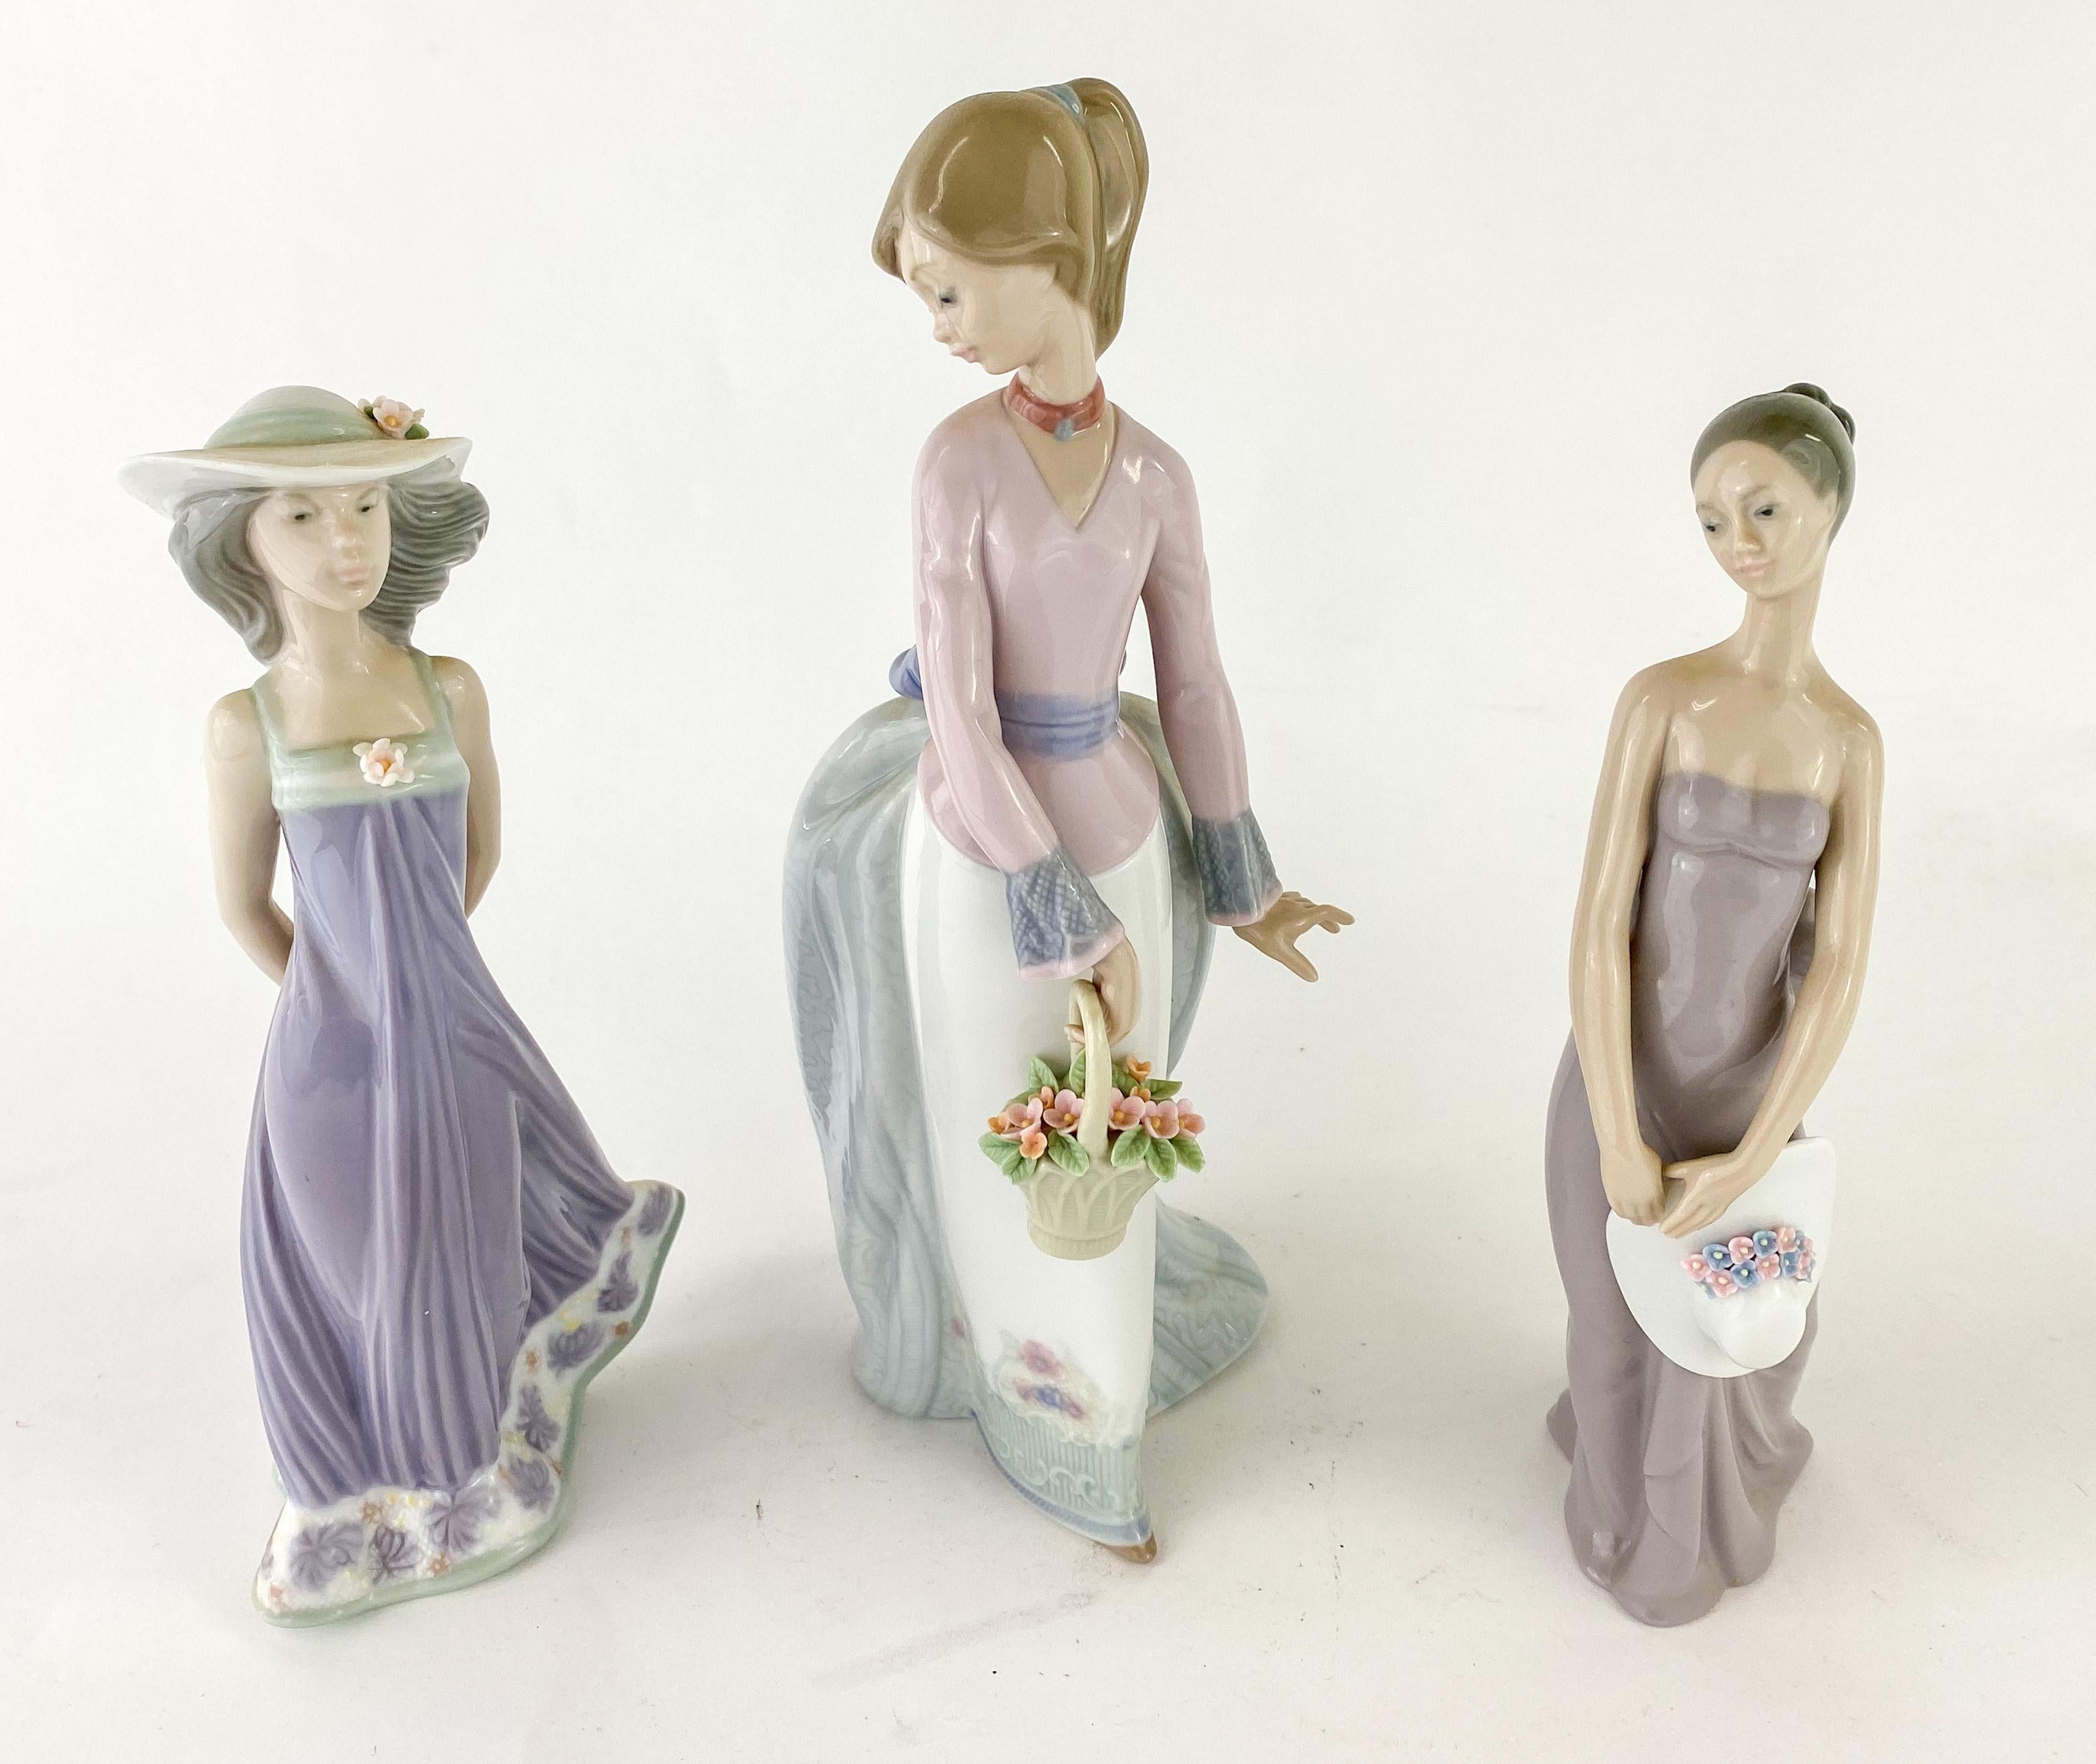 A beautiful Authentic set of 3 retired ladies figurines handmade in Spain by LLadro. The set includes: 
 Figurine 1 entitled 